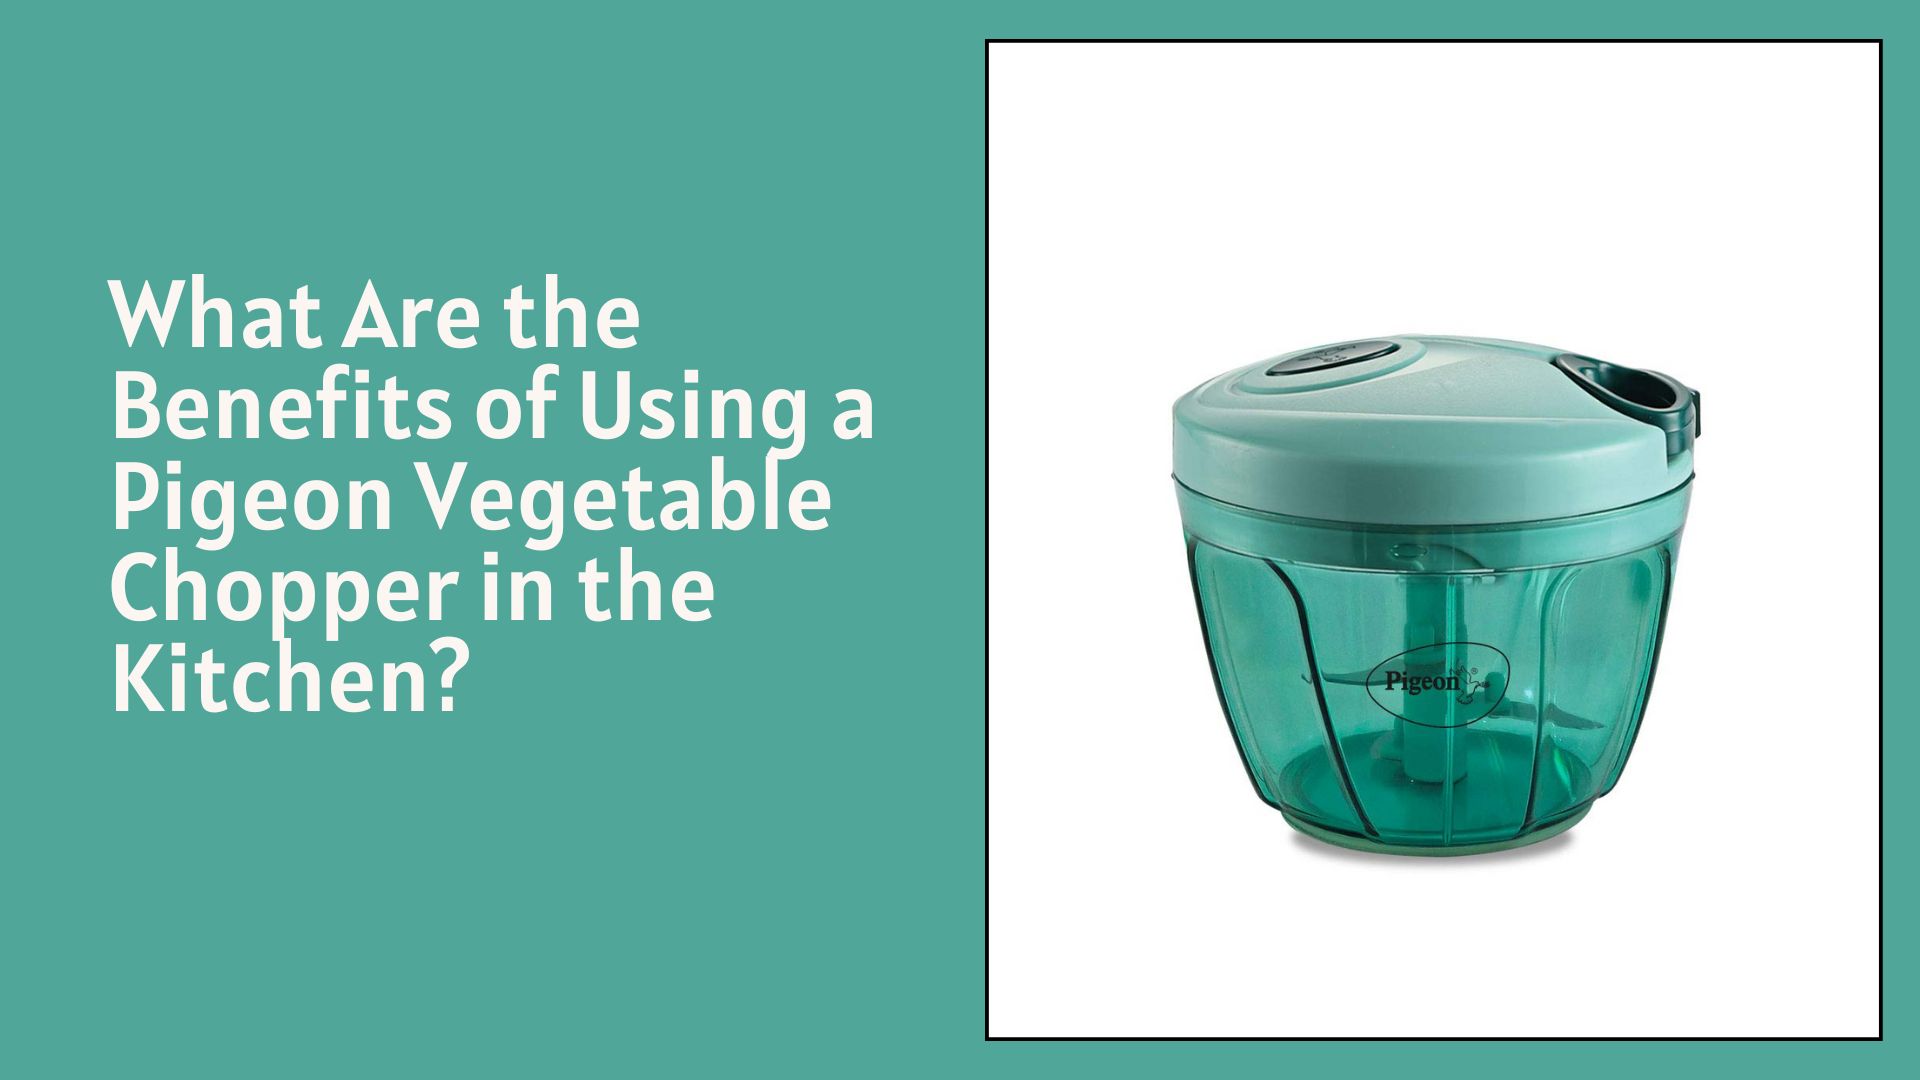 What Are the Benefits of Using a Pigeon Vegetable Chopper in the Kitchen?